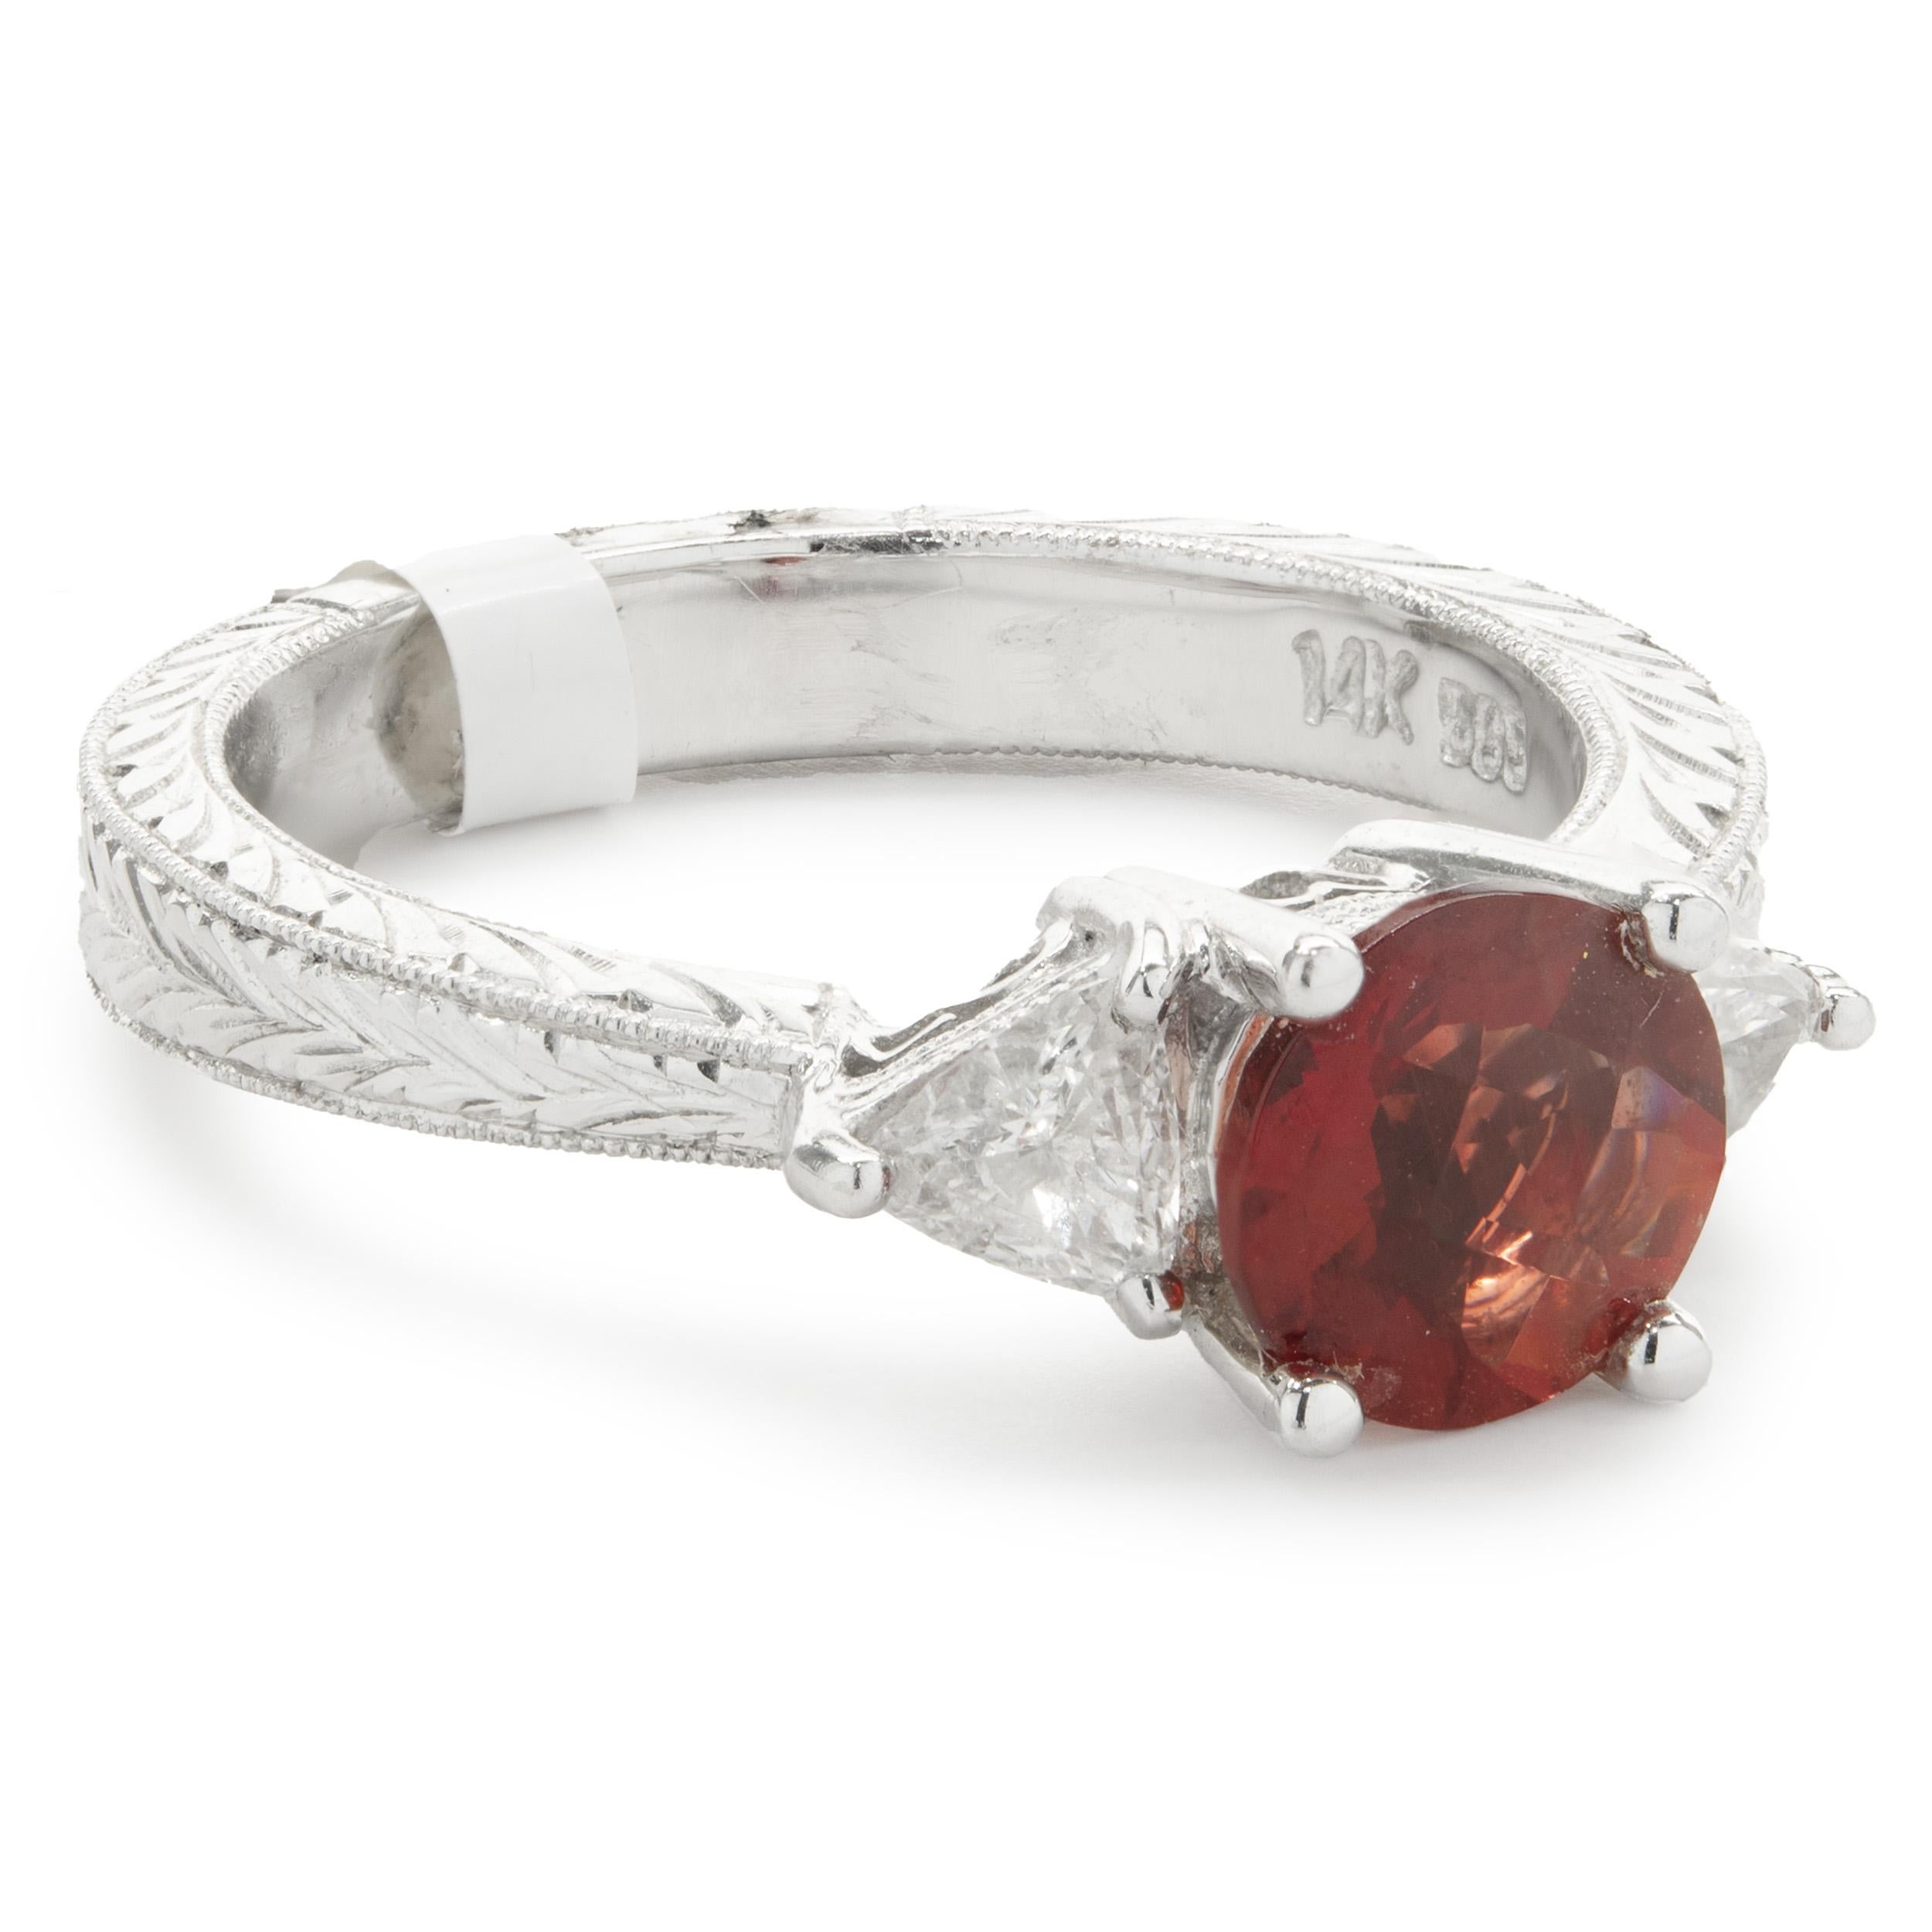 Designer: custom
Material: 14K white gold
Sunstone: 1 round checker board cut = 0.91ct
Diamond: 2 trillion cut = 0.30cttw
Color: H
Clarity: SI1
Ring Size: 6.25 (please allow up to 2 additional business days for sizing requests)
Dimensions: ring top